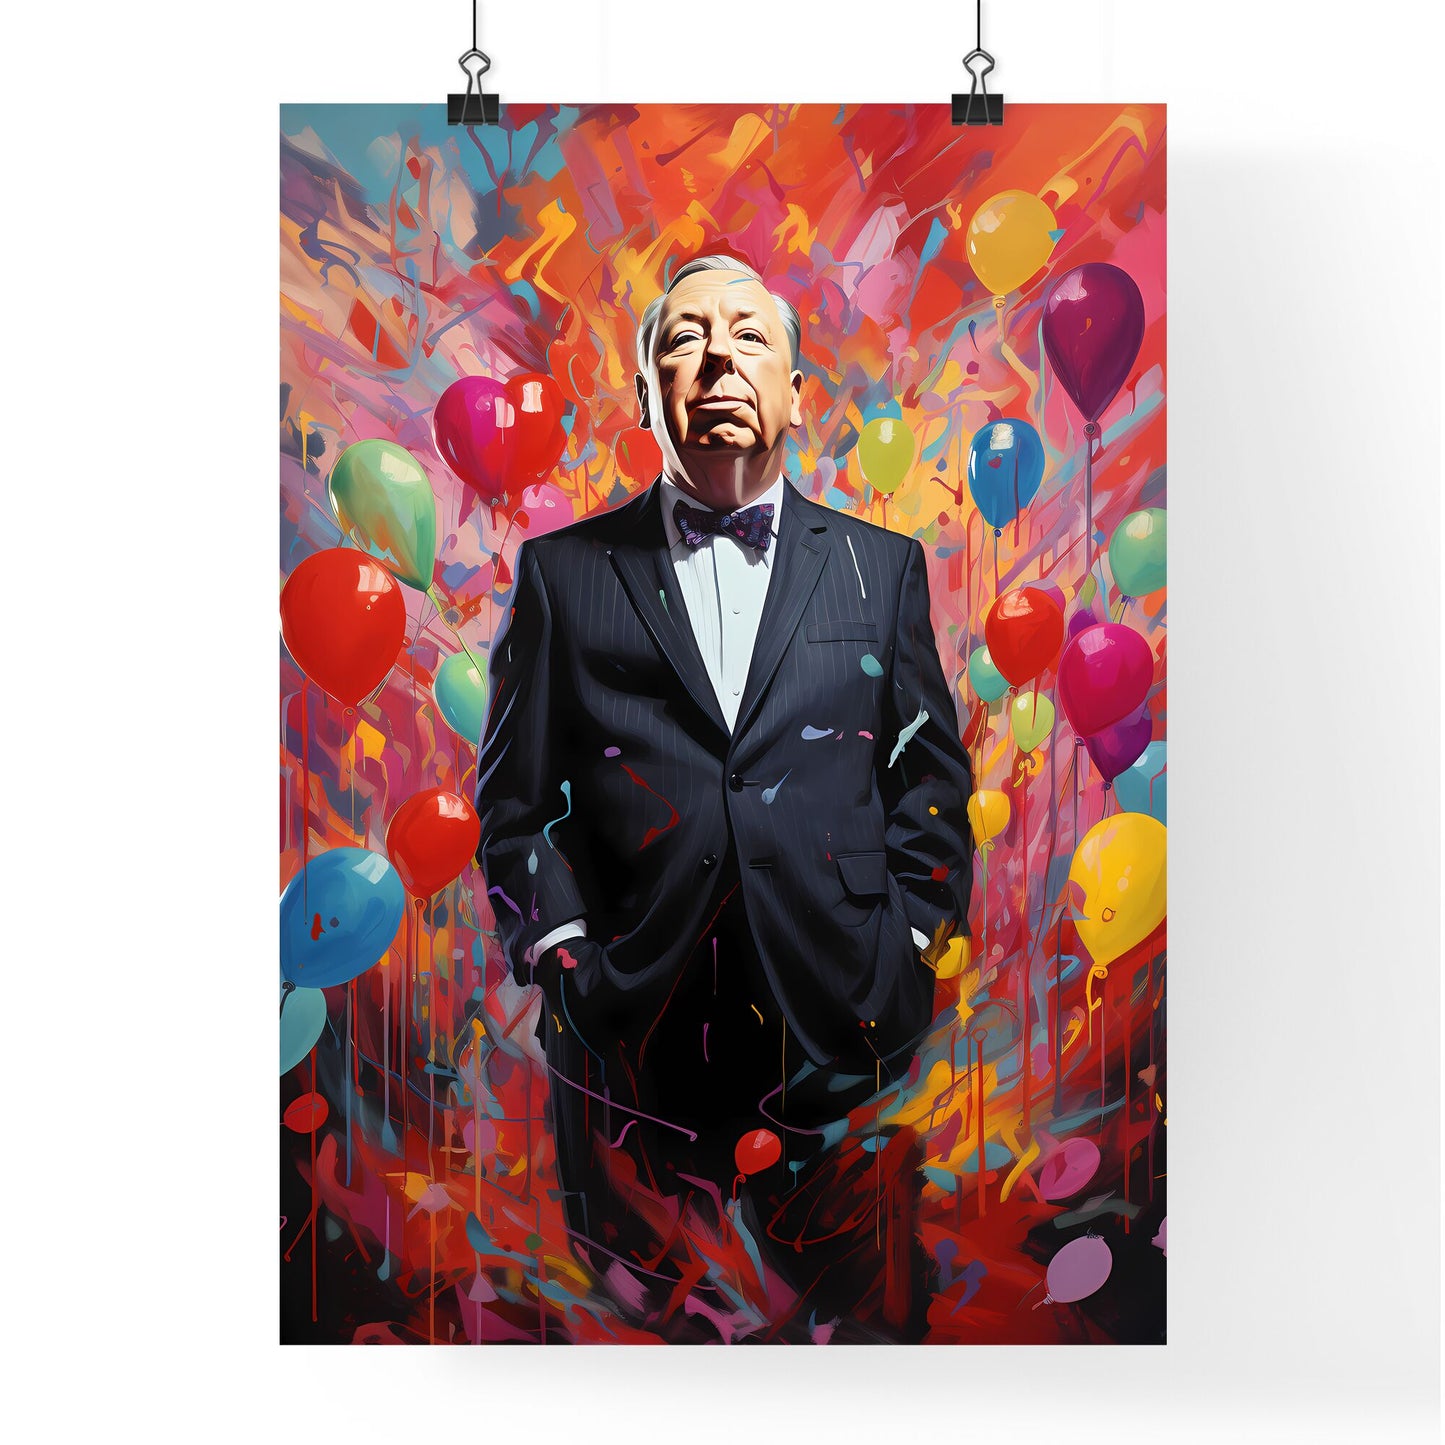 Alfred Hitchcock - A Man In A Suit With Balloons Around Him Default Title